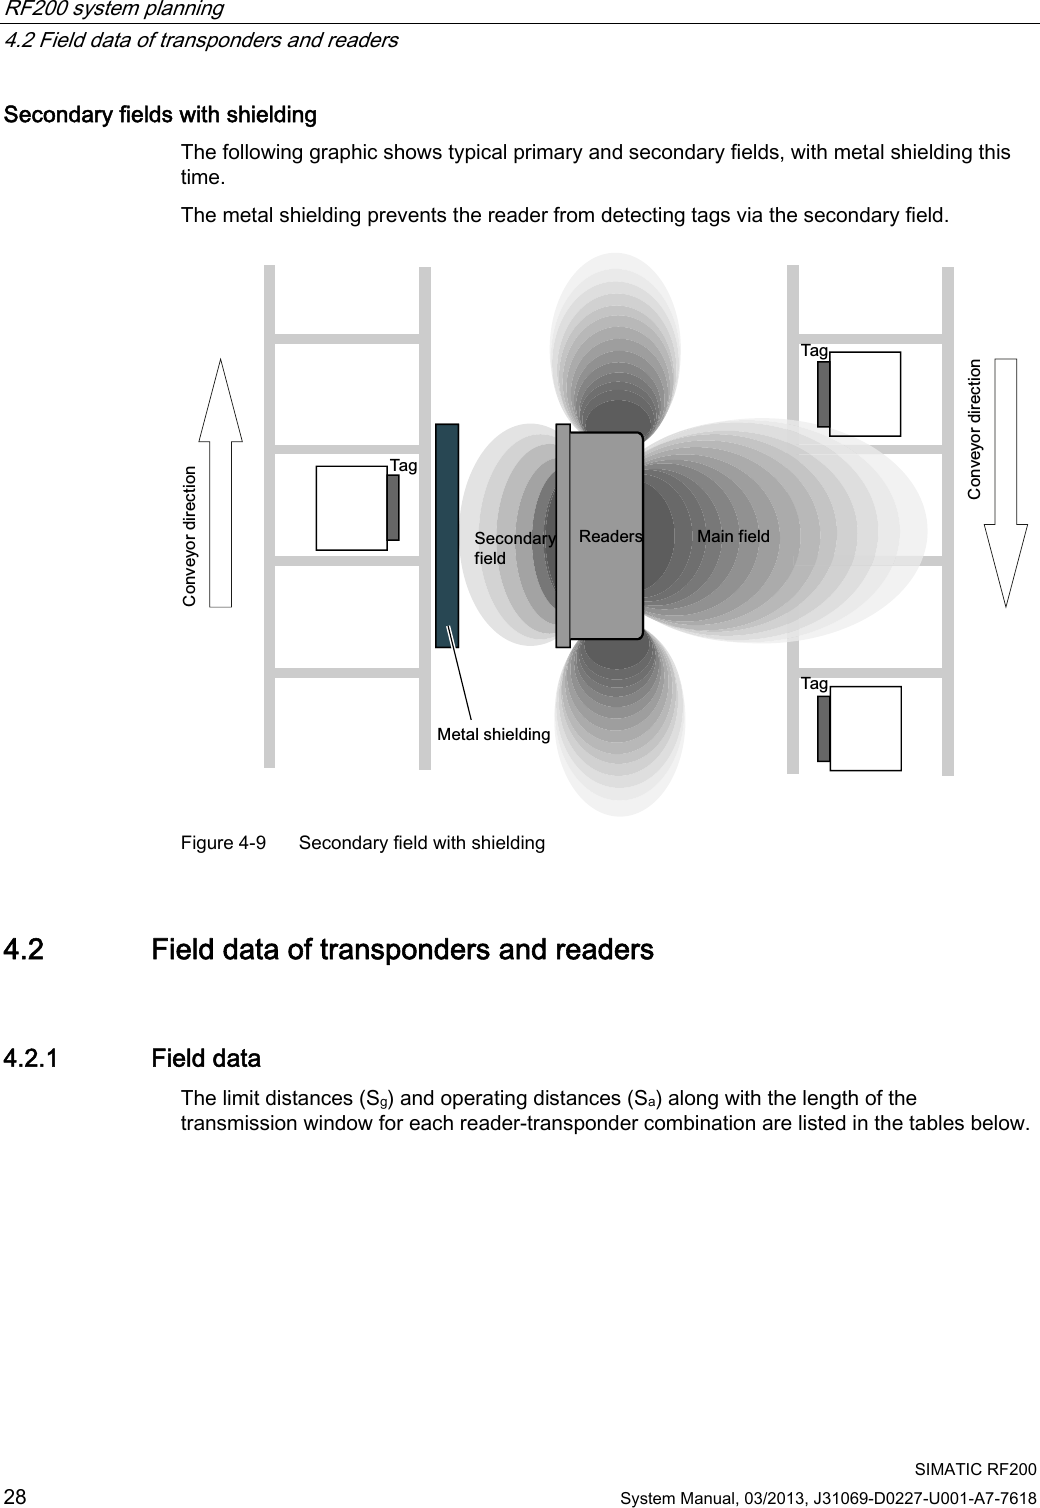 RF200 system planning   4.2 Field data of transponders and readers  SIMATIC RF200 28 System Manual, 03/2013, J31069-D0227-U001-A7-7618 Secondary fields with shielding The following graphic shows typical primary and secondary fields, with metal shielding this time.  The metal shielding prevents the reader from detecting tags via the secondary field. 5HDGHUV6HFRQGDU\ILHOG0DLQILHOG0HWDOVKLHOGLQJ&amp;RQYH\RUGLUHFWLRQ&amp;RQYH\RUGLUHFWLRQ7DJ7DJ7DJ Figure 4-9  Secondary field with shielding 4.2 Field data of transponders and readers 4.2.1 Field data The limit distances (Sg) and operating distances (Sa) along with the length of the transmission window for each reader-transponder combination are listed in the tables below.  